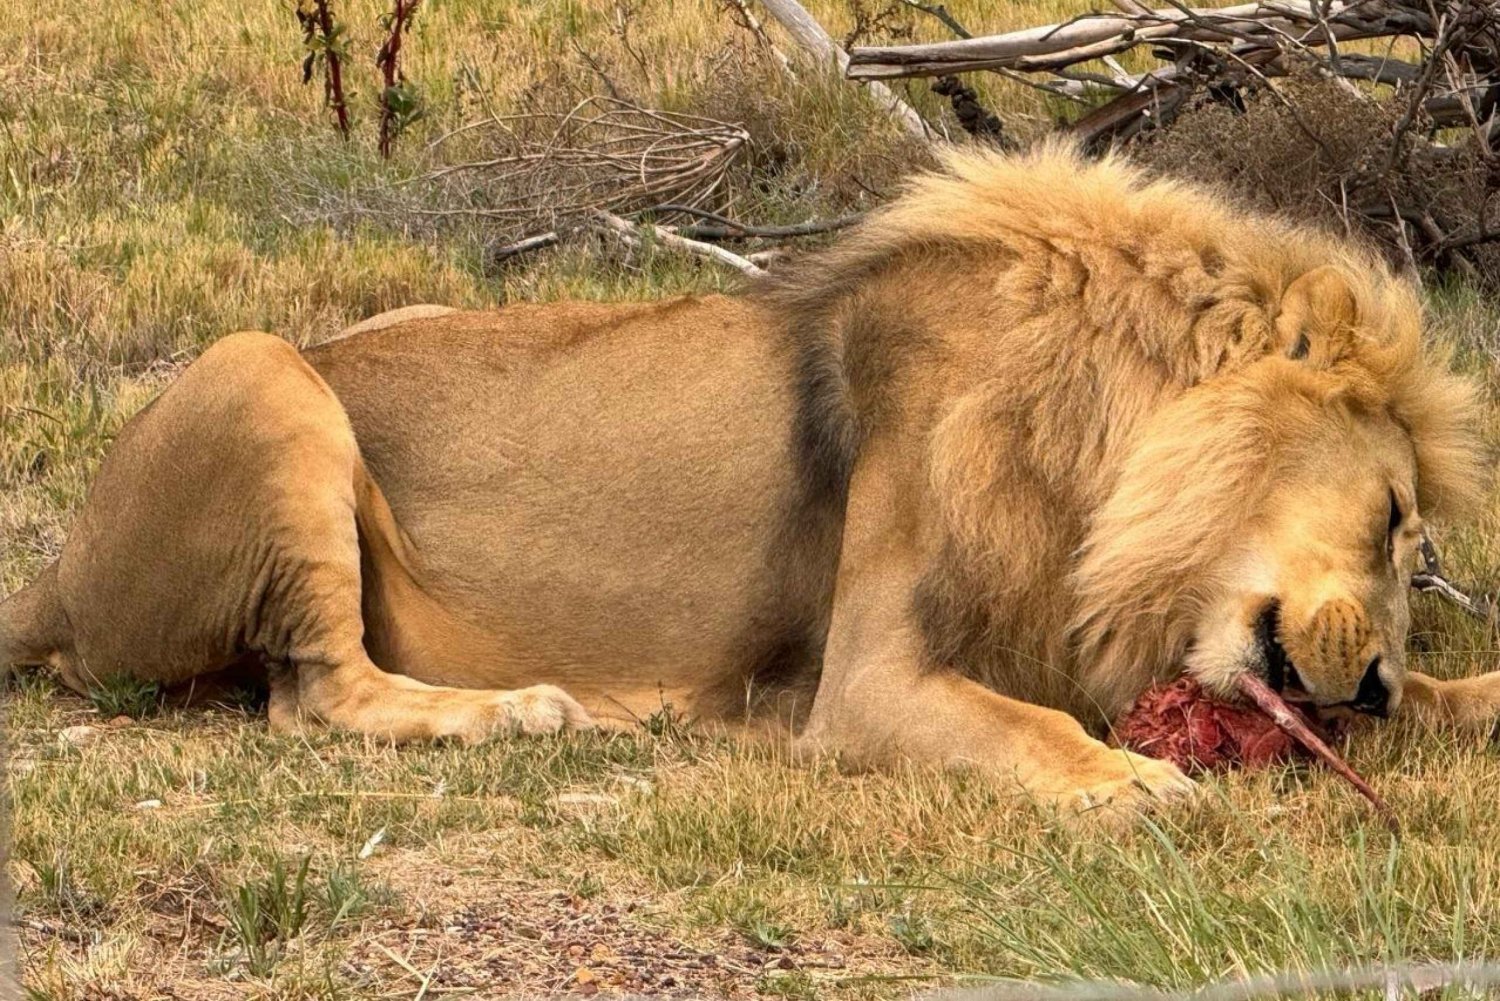 Private Tour: Witness Lion Feeding Up Close - Book Now!